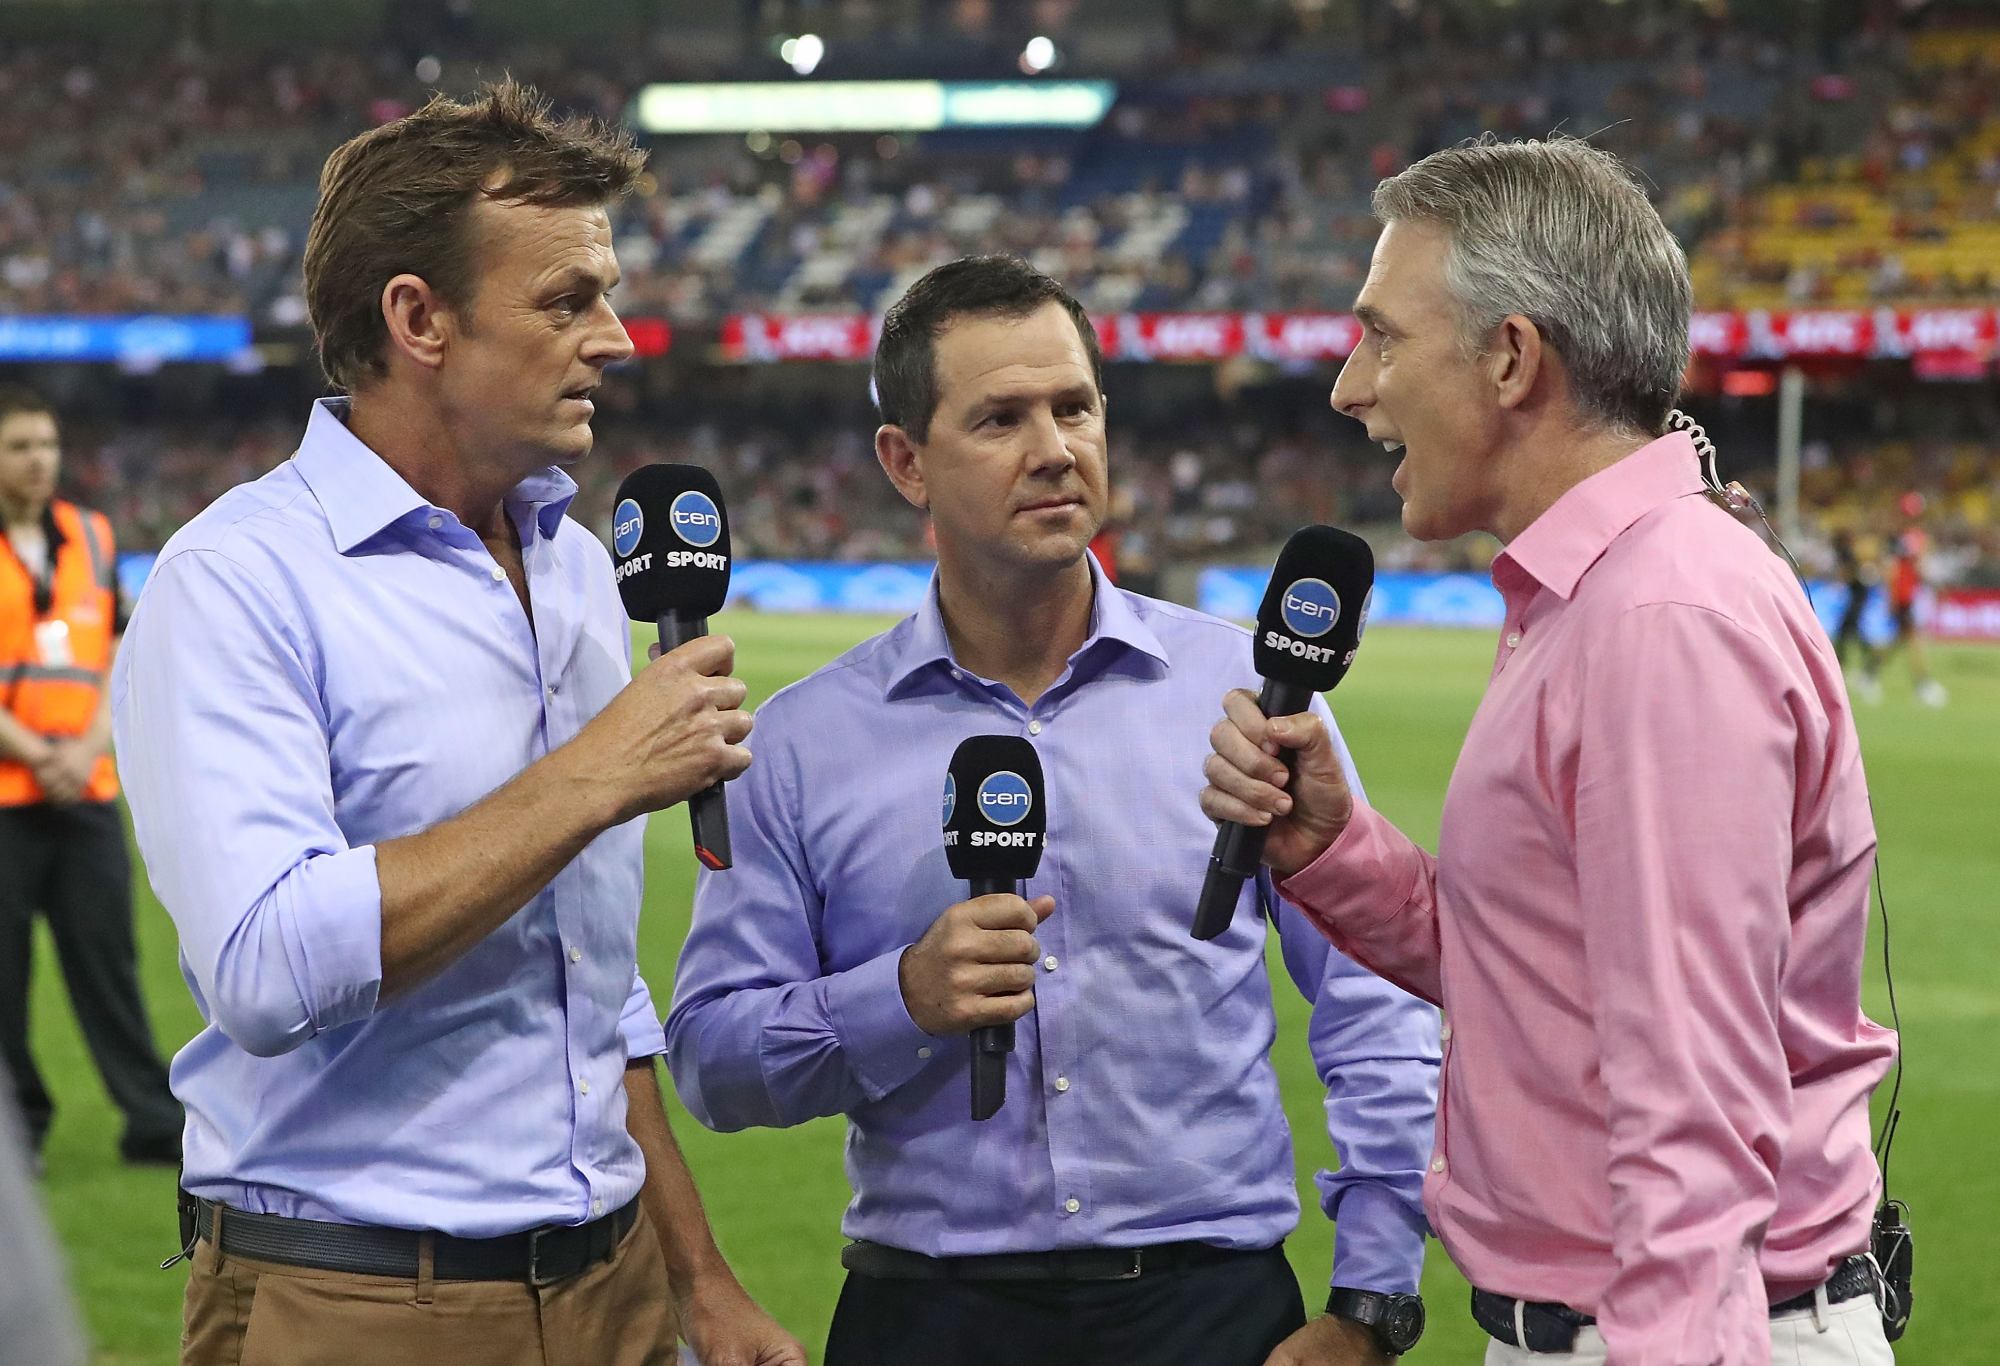 MELBOURNE, AUSTRALIA - JANUARY 07:  Network Ten's commentary team members Adam Gilchrist, Ricky Ponting and Damien Fleming  during the Big Bash League match between the Melbourne Renegades and the Melbourne Stars at Etihad Stadium on January 7, 2017 in Melbourne, Australia.  (Photo by Scott Barbour - CA/Cricket Australia via Getty Images/Getty Images)